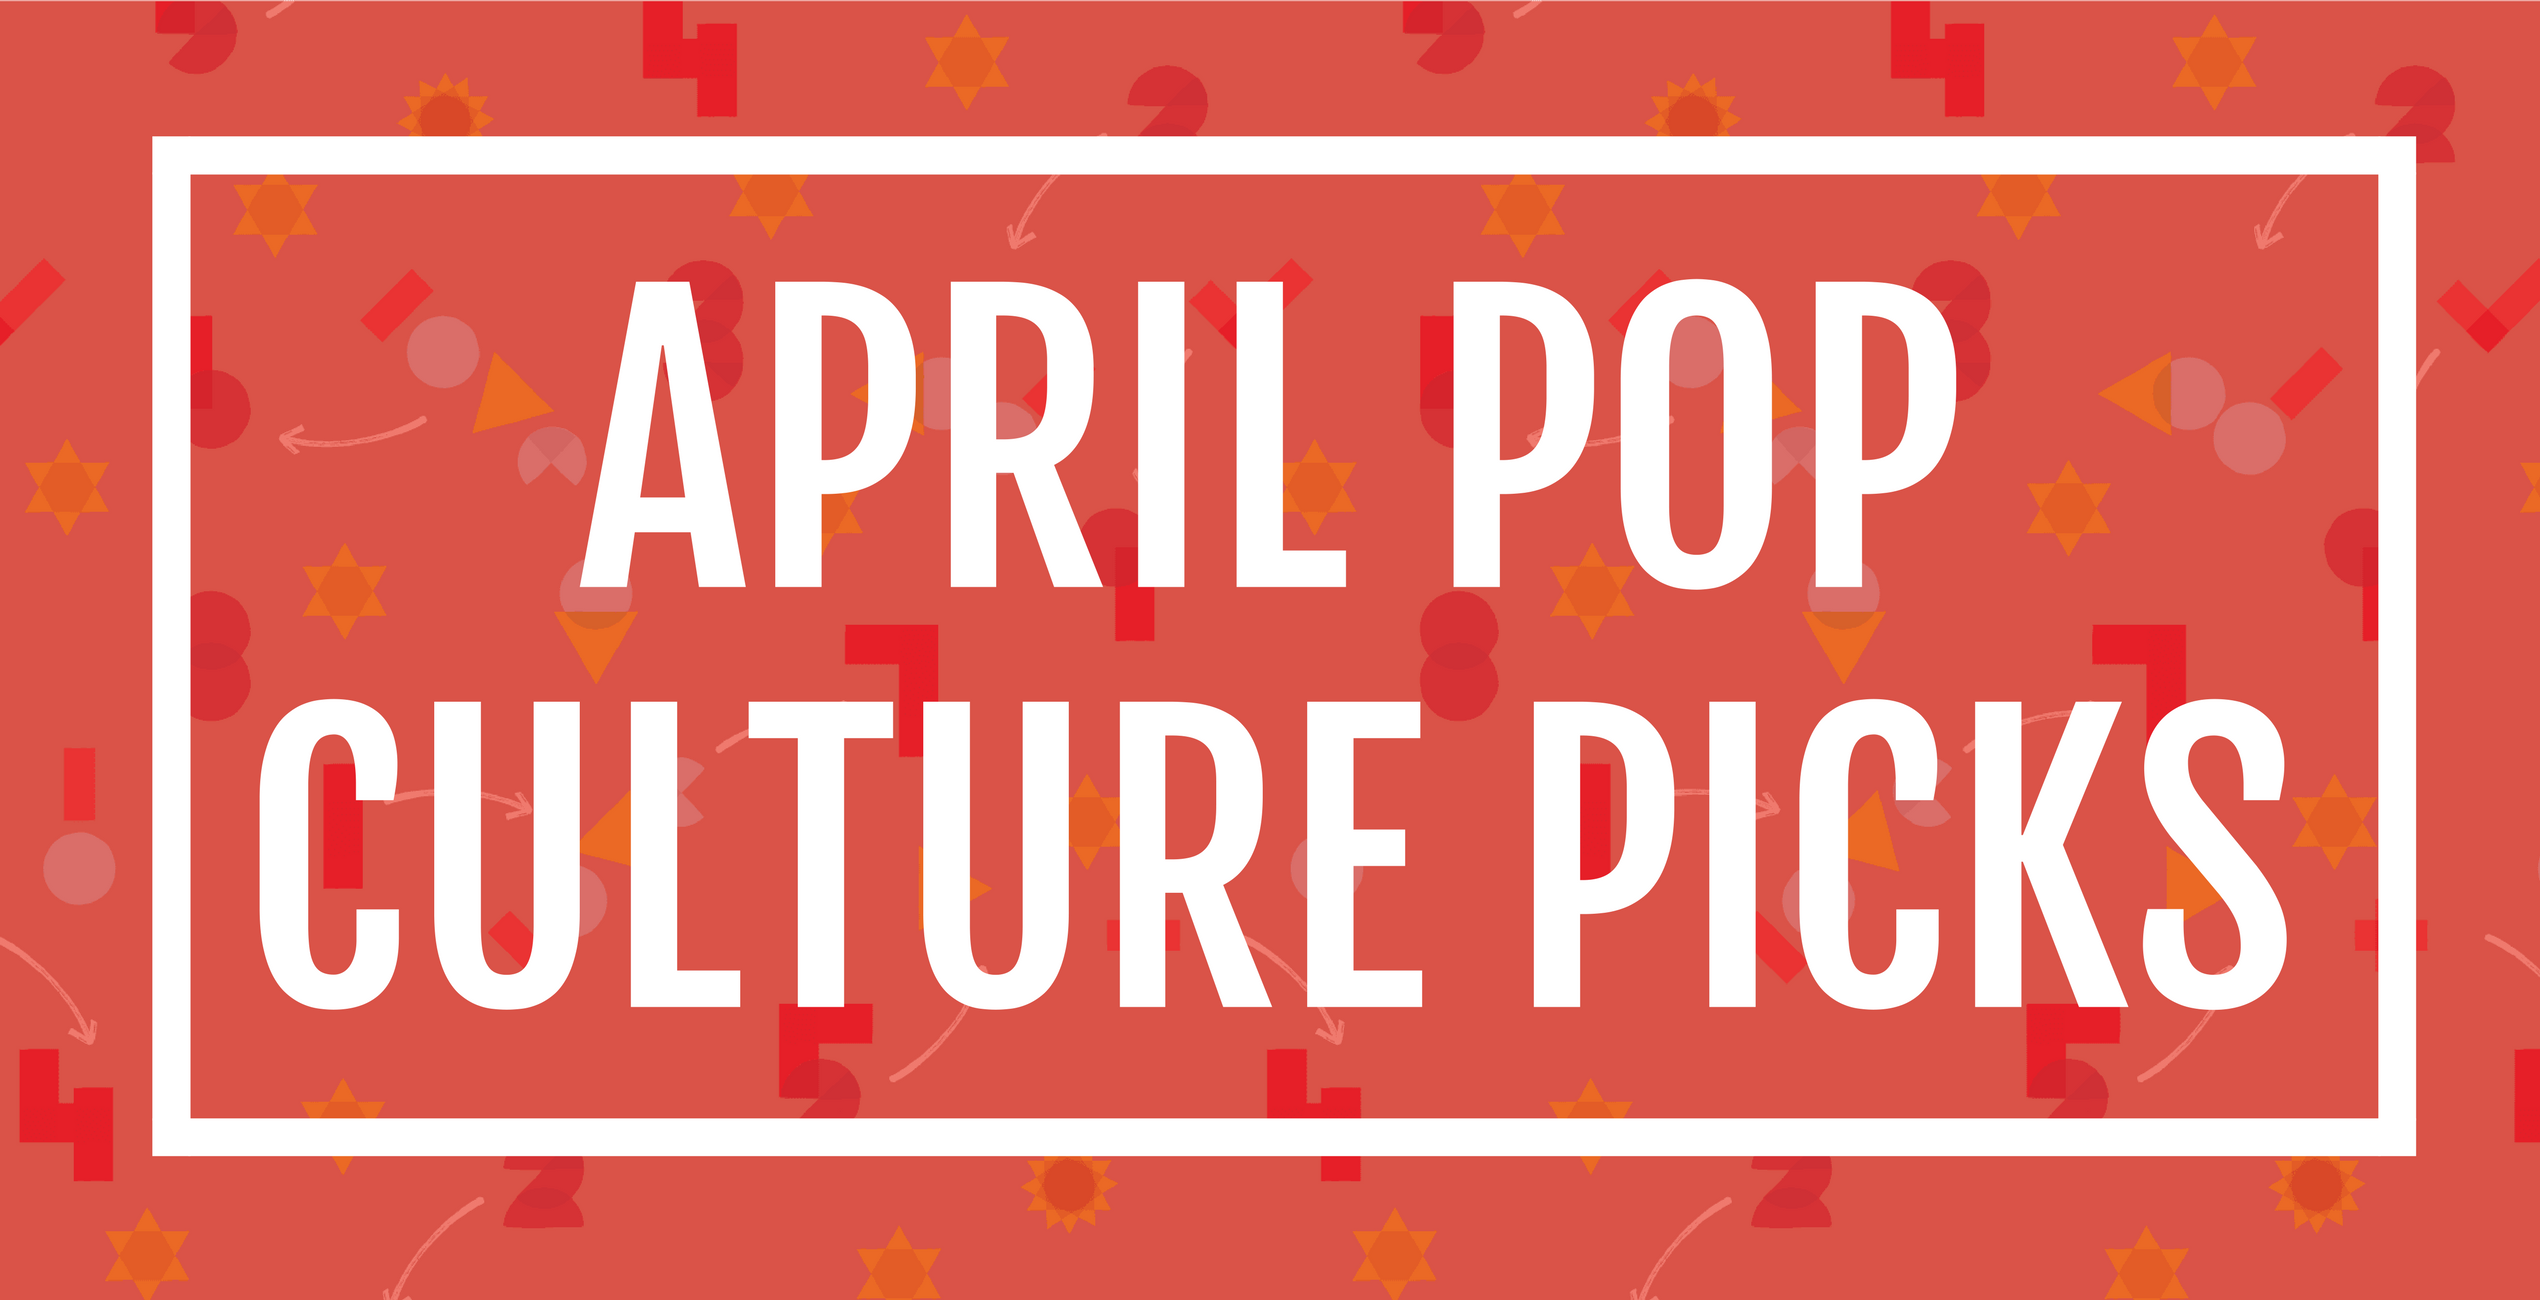 AE's Pop Culture Picks for the month of April.